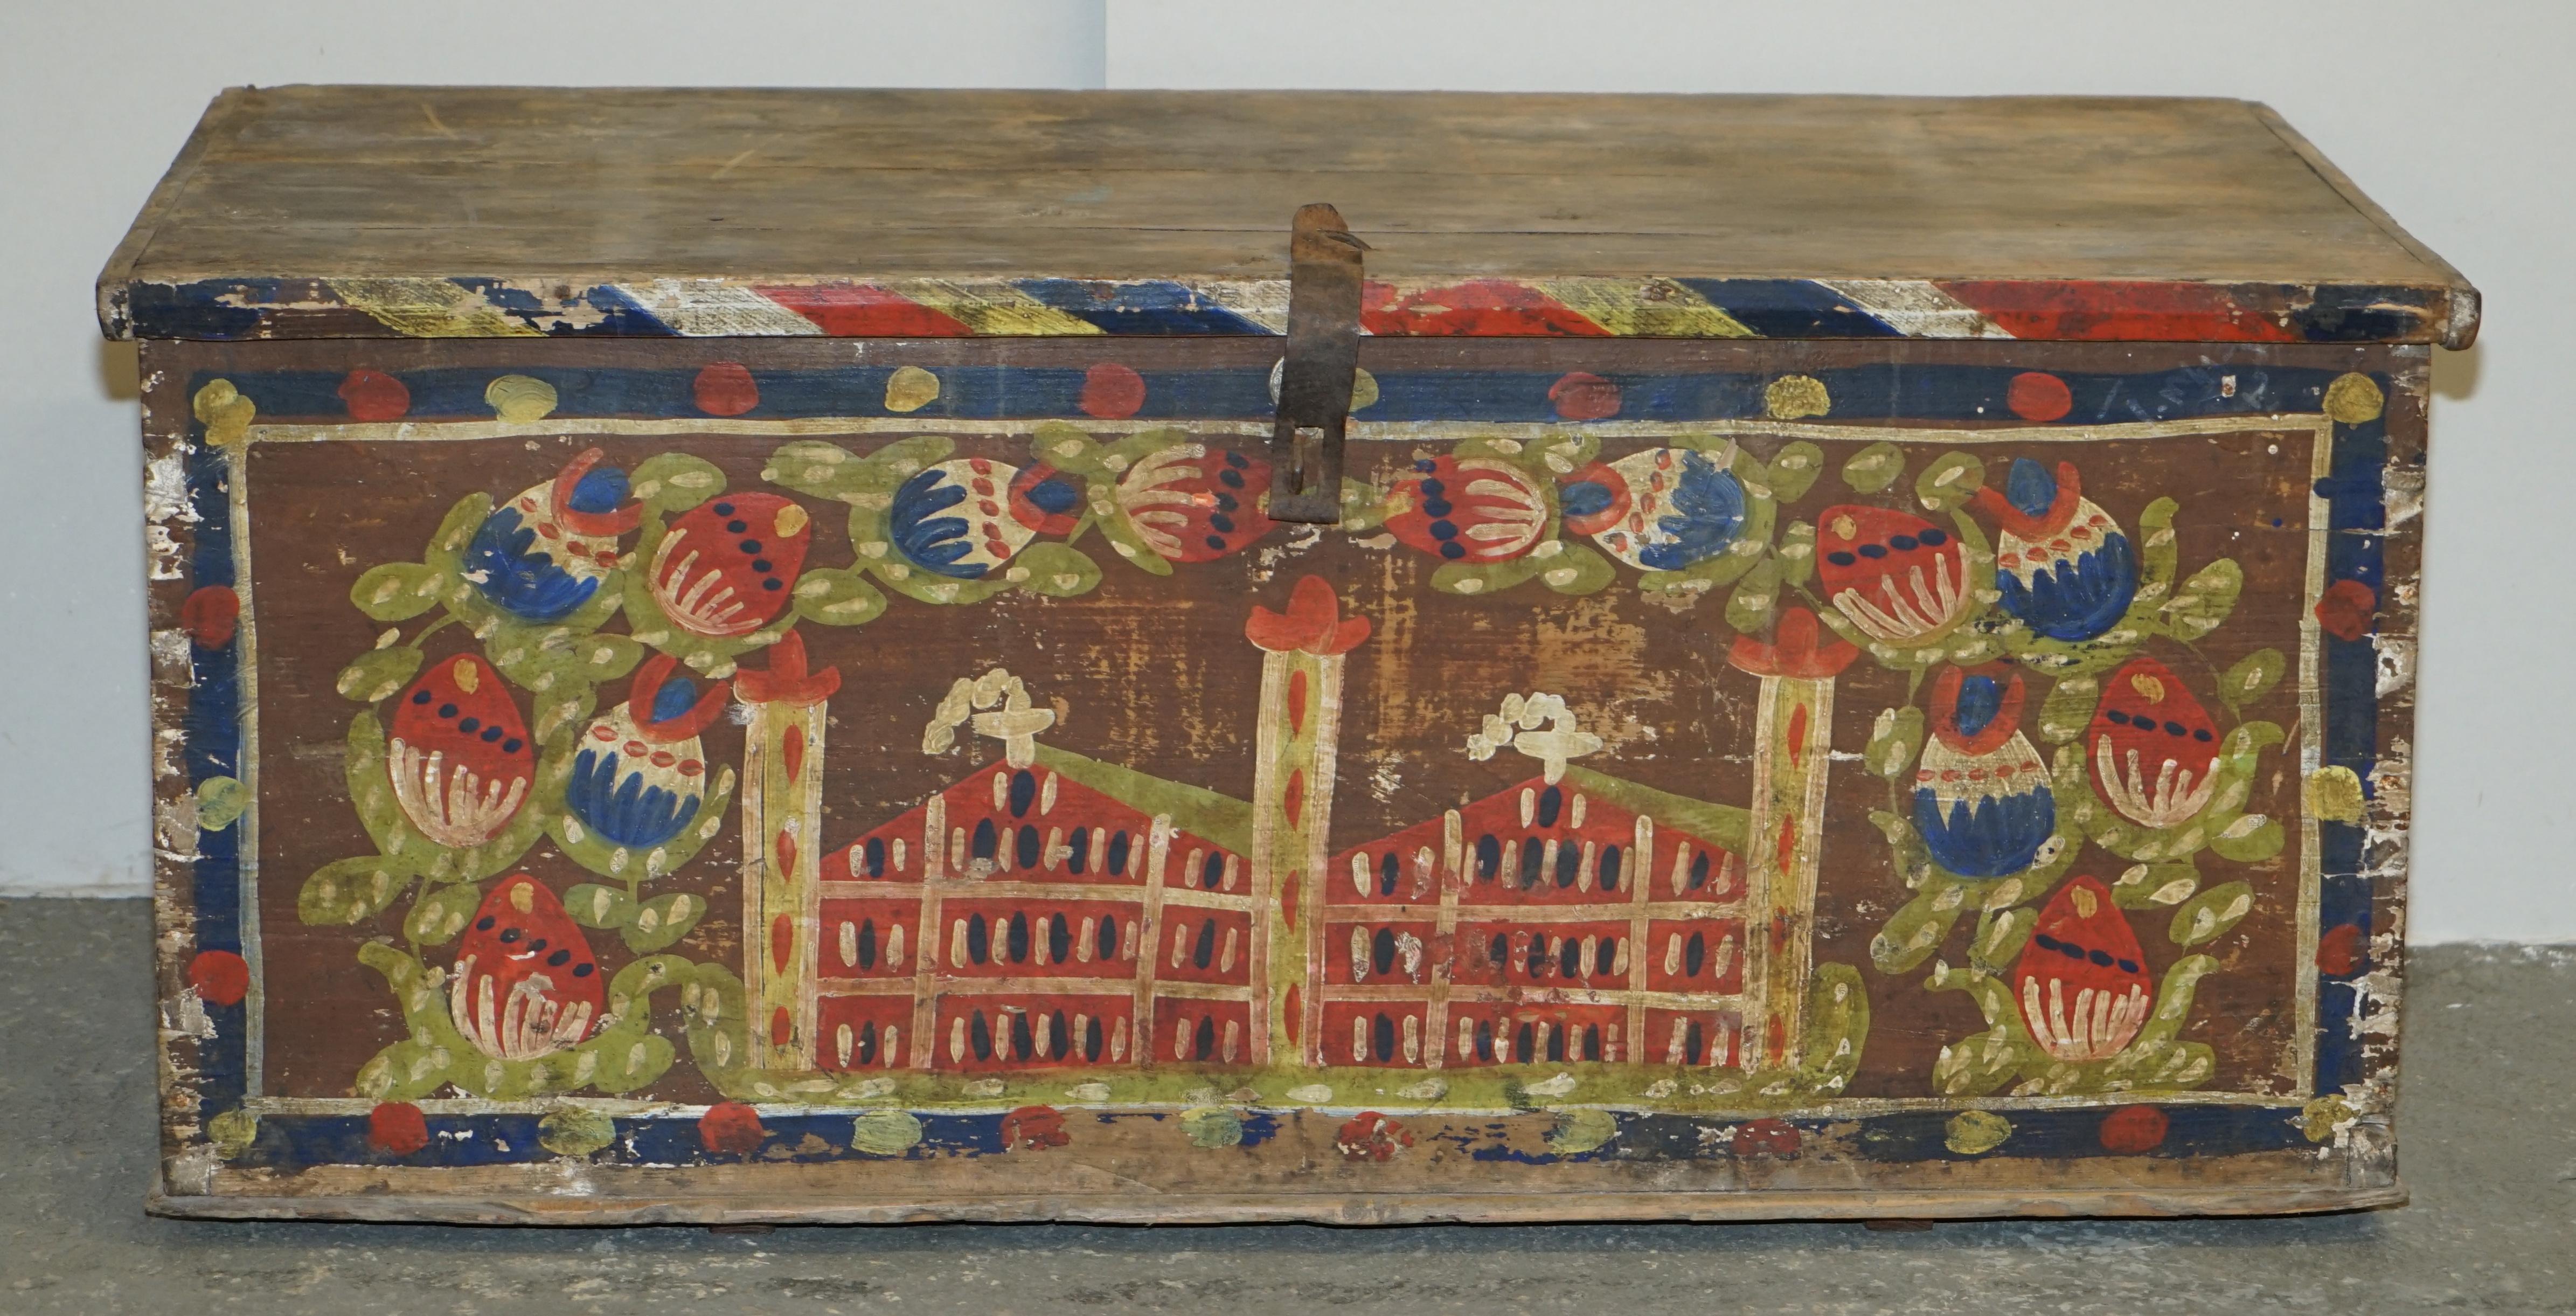 We are delighted to offer for sale this stunning, circa 1880 hand painted Romanian clothes trunk or marriage coffer chest depicting a large Church to the front.

I have recently purchased a very large collection of these original, antique painted